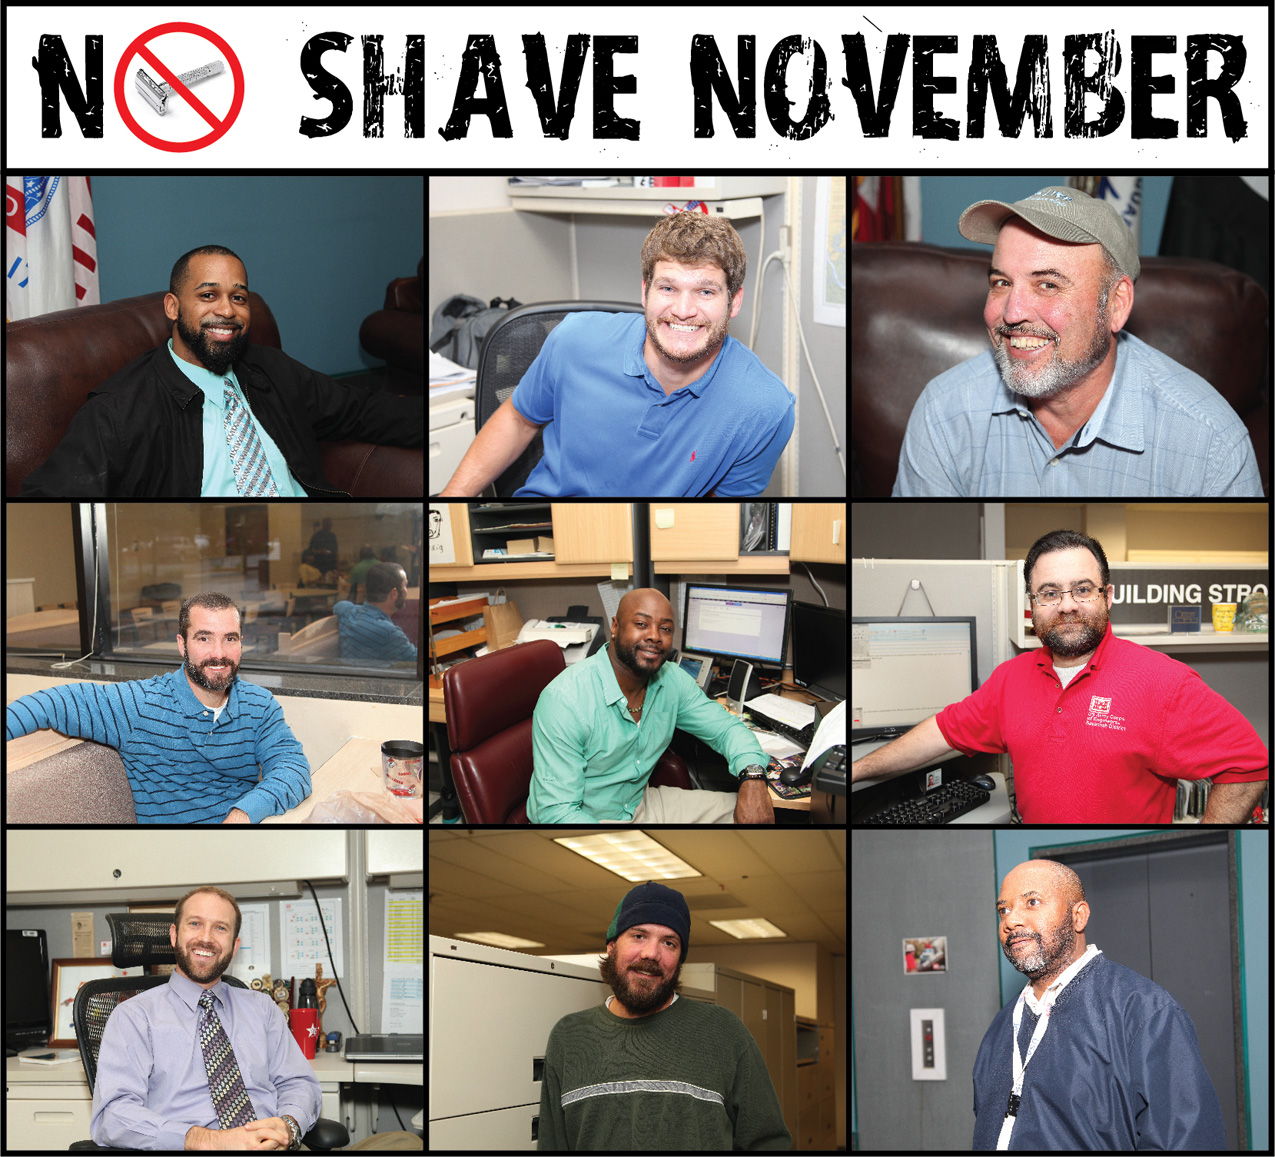 No-Shave November caught on at the U.S. Army Corps of Engineers Savannah District. Pictured top row from left: Canton Gardenhire, Drew Smith, Jim Bufford. Middle row from left: Shaun Blocker, Craig Jahnrette, George Jumara. Bottom row from left: Russ Wicke, Donald Hendrix, Michael Roberts